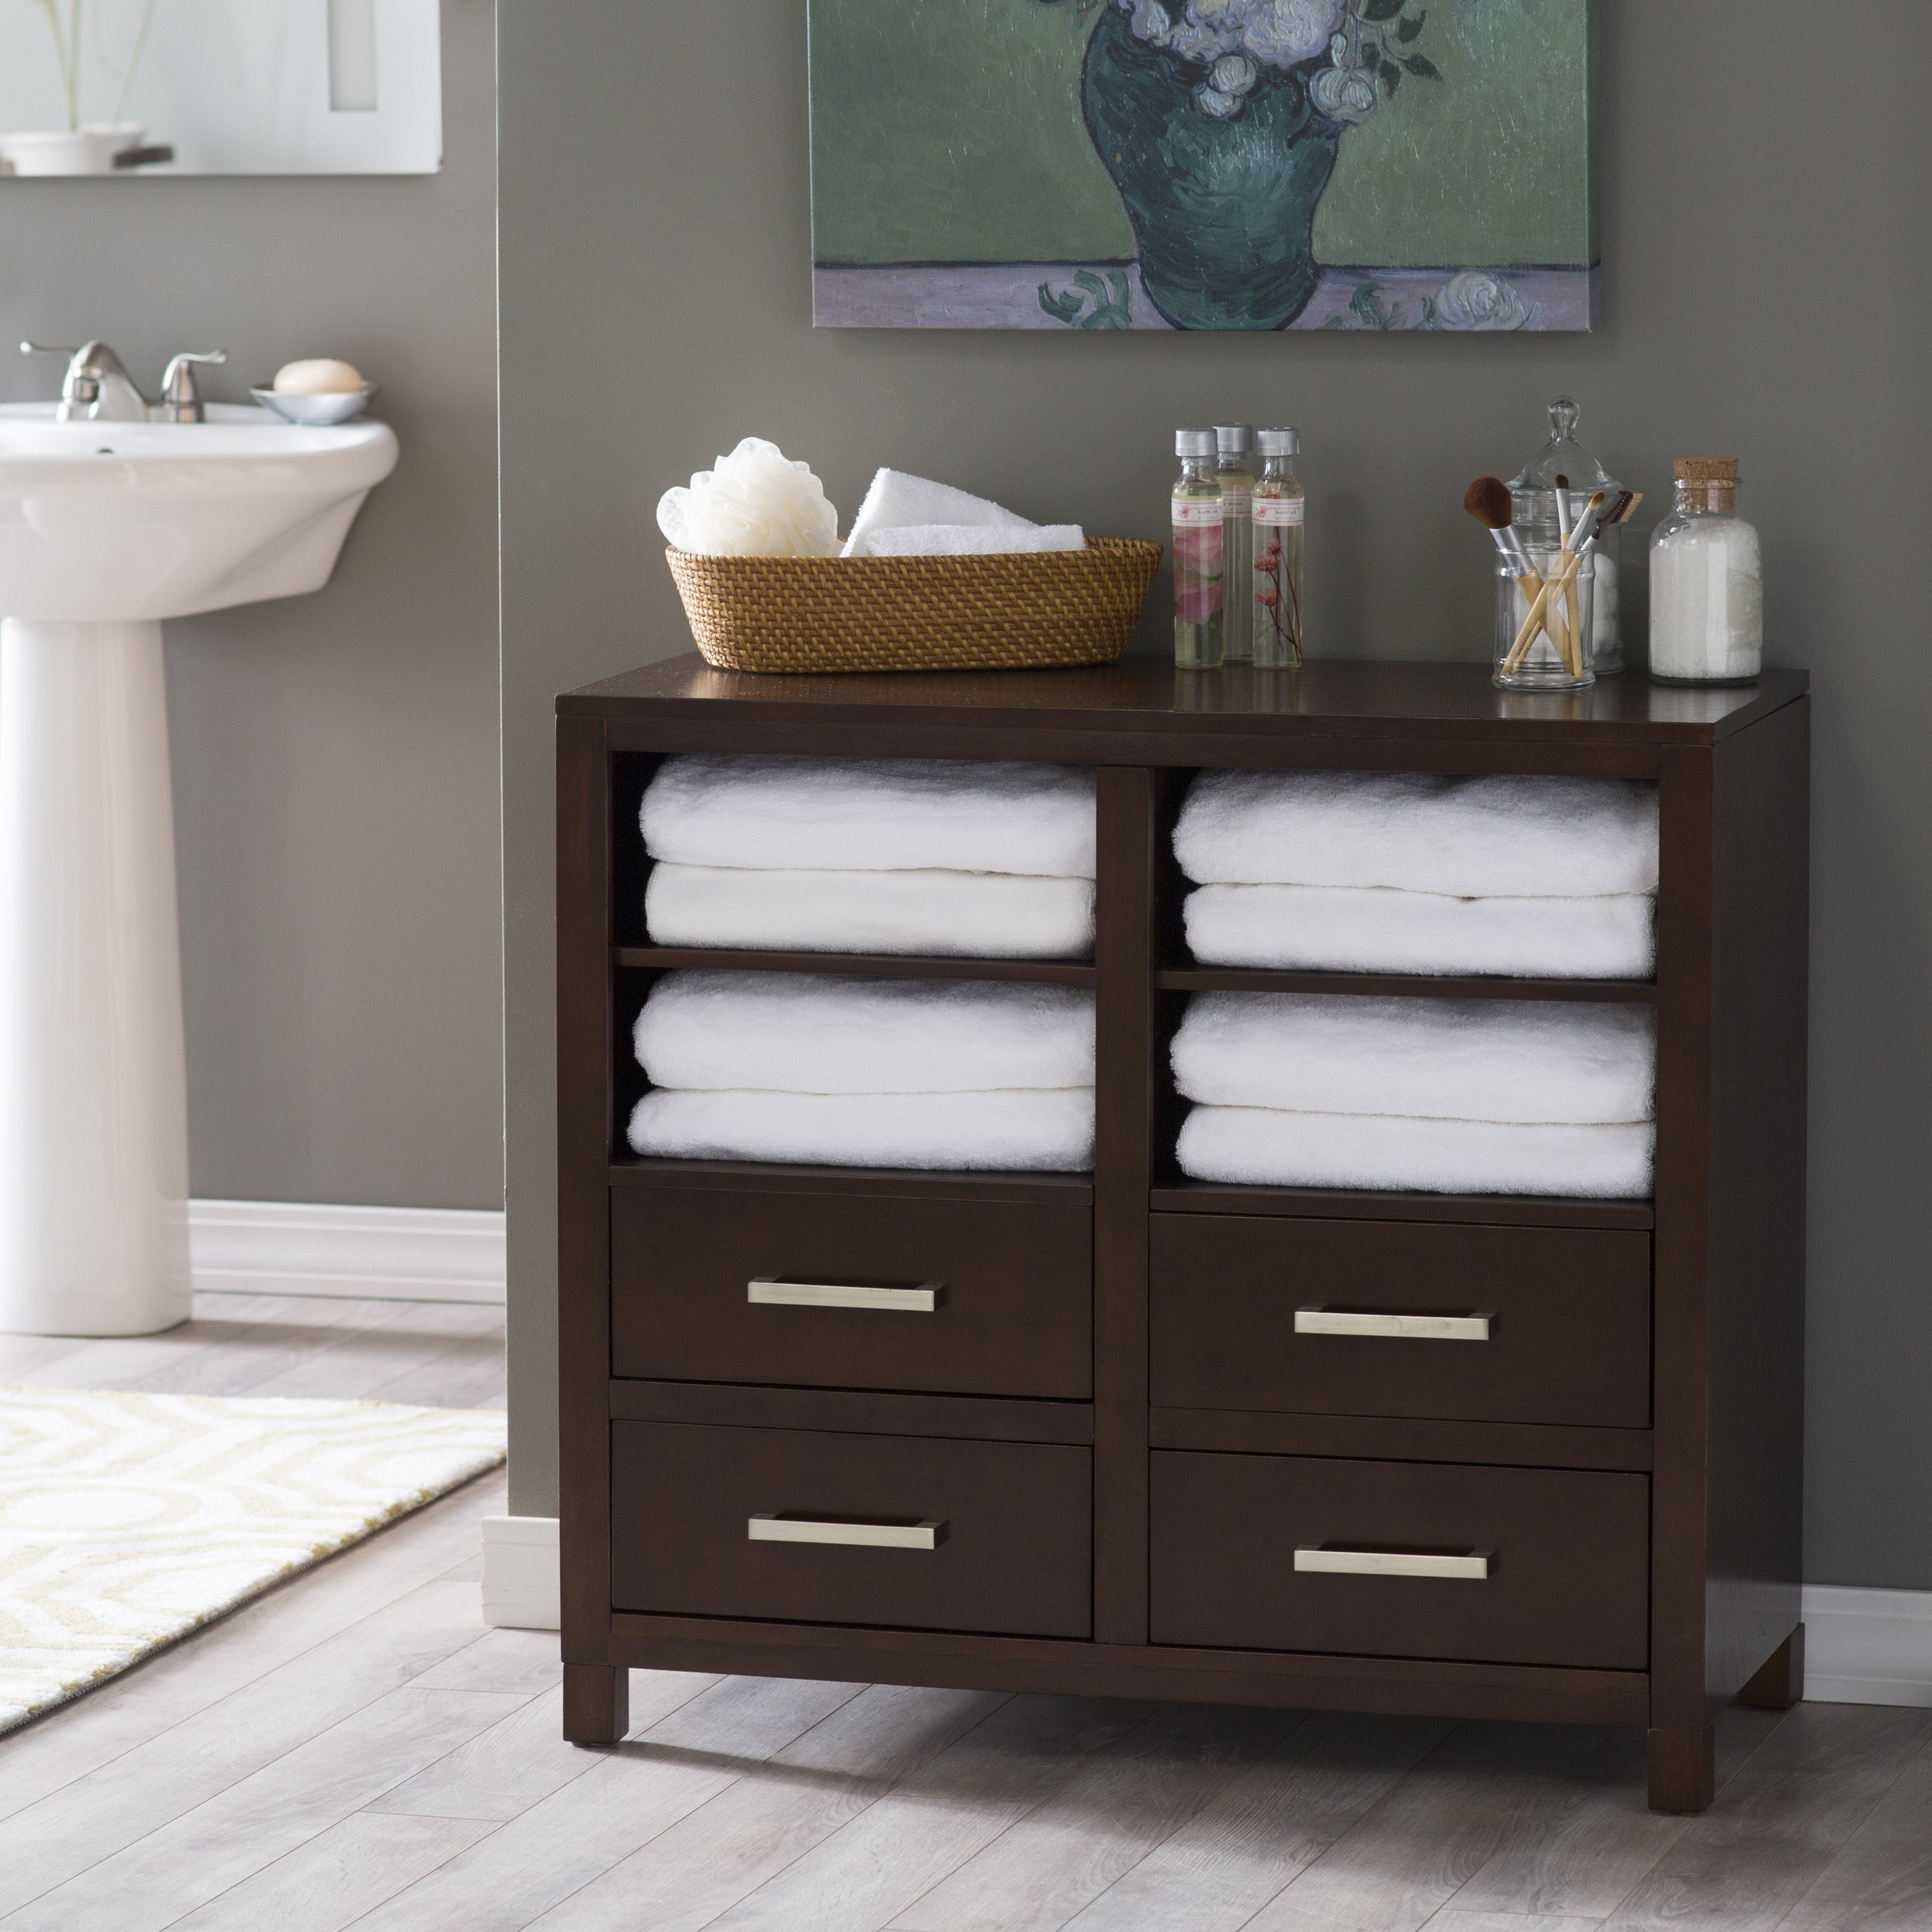 Best ideas about Small Bathroom Storage Cabinet
. Save or Pin Bathroom Appealing Bathroom Storage Design With Small Now.